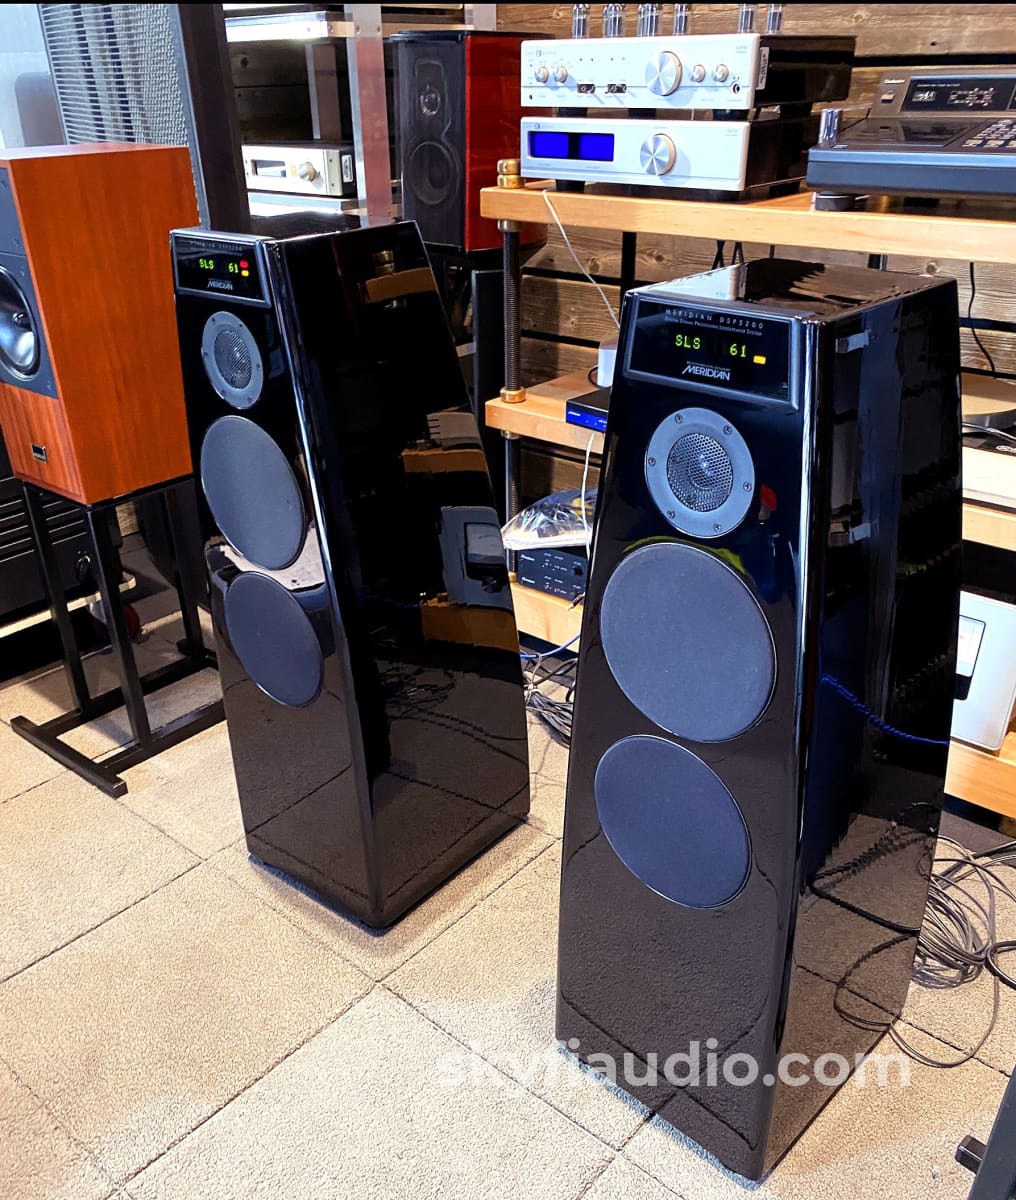 Meridian Dsp5200 Digital Active Speakers With Upgrades And Cartons $15 000 Msrp